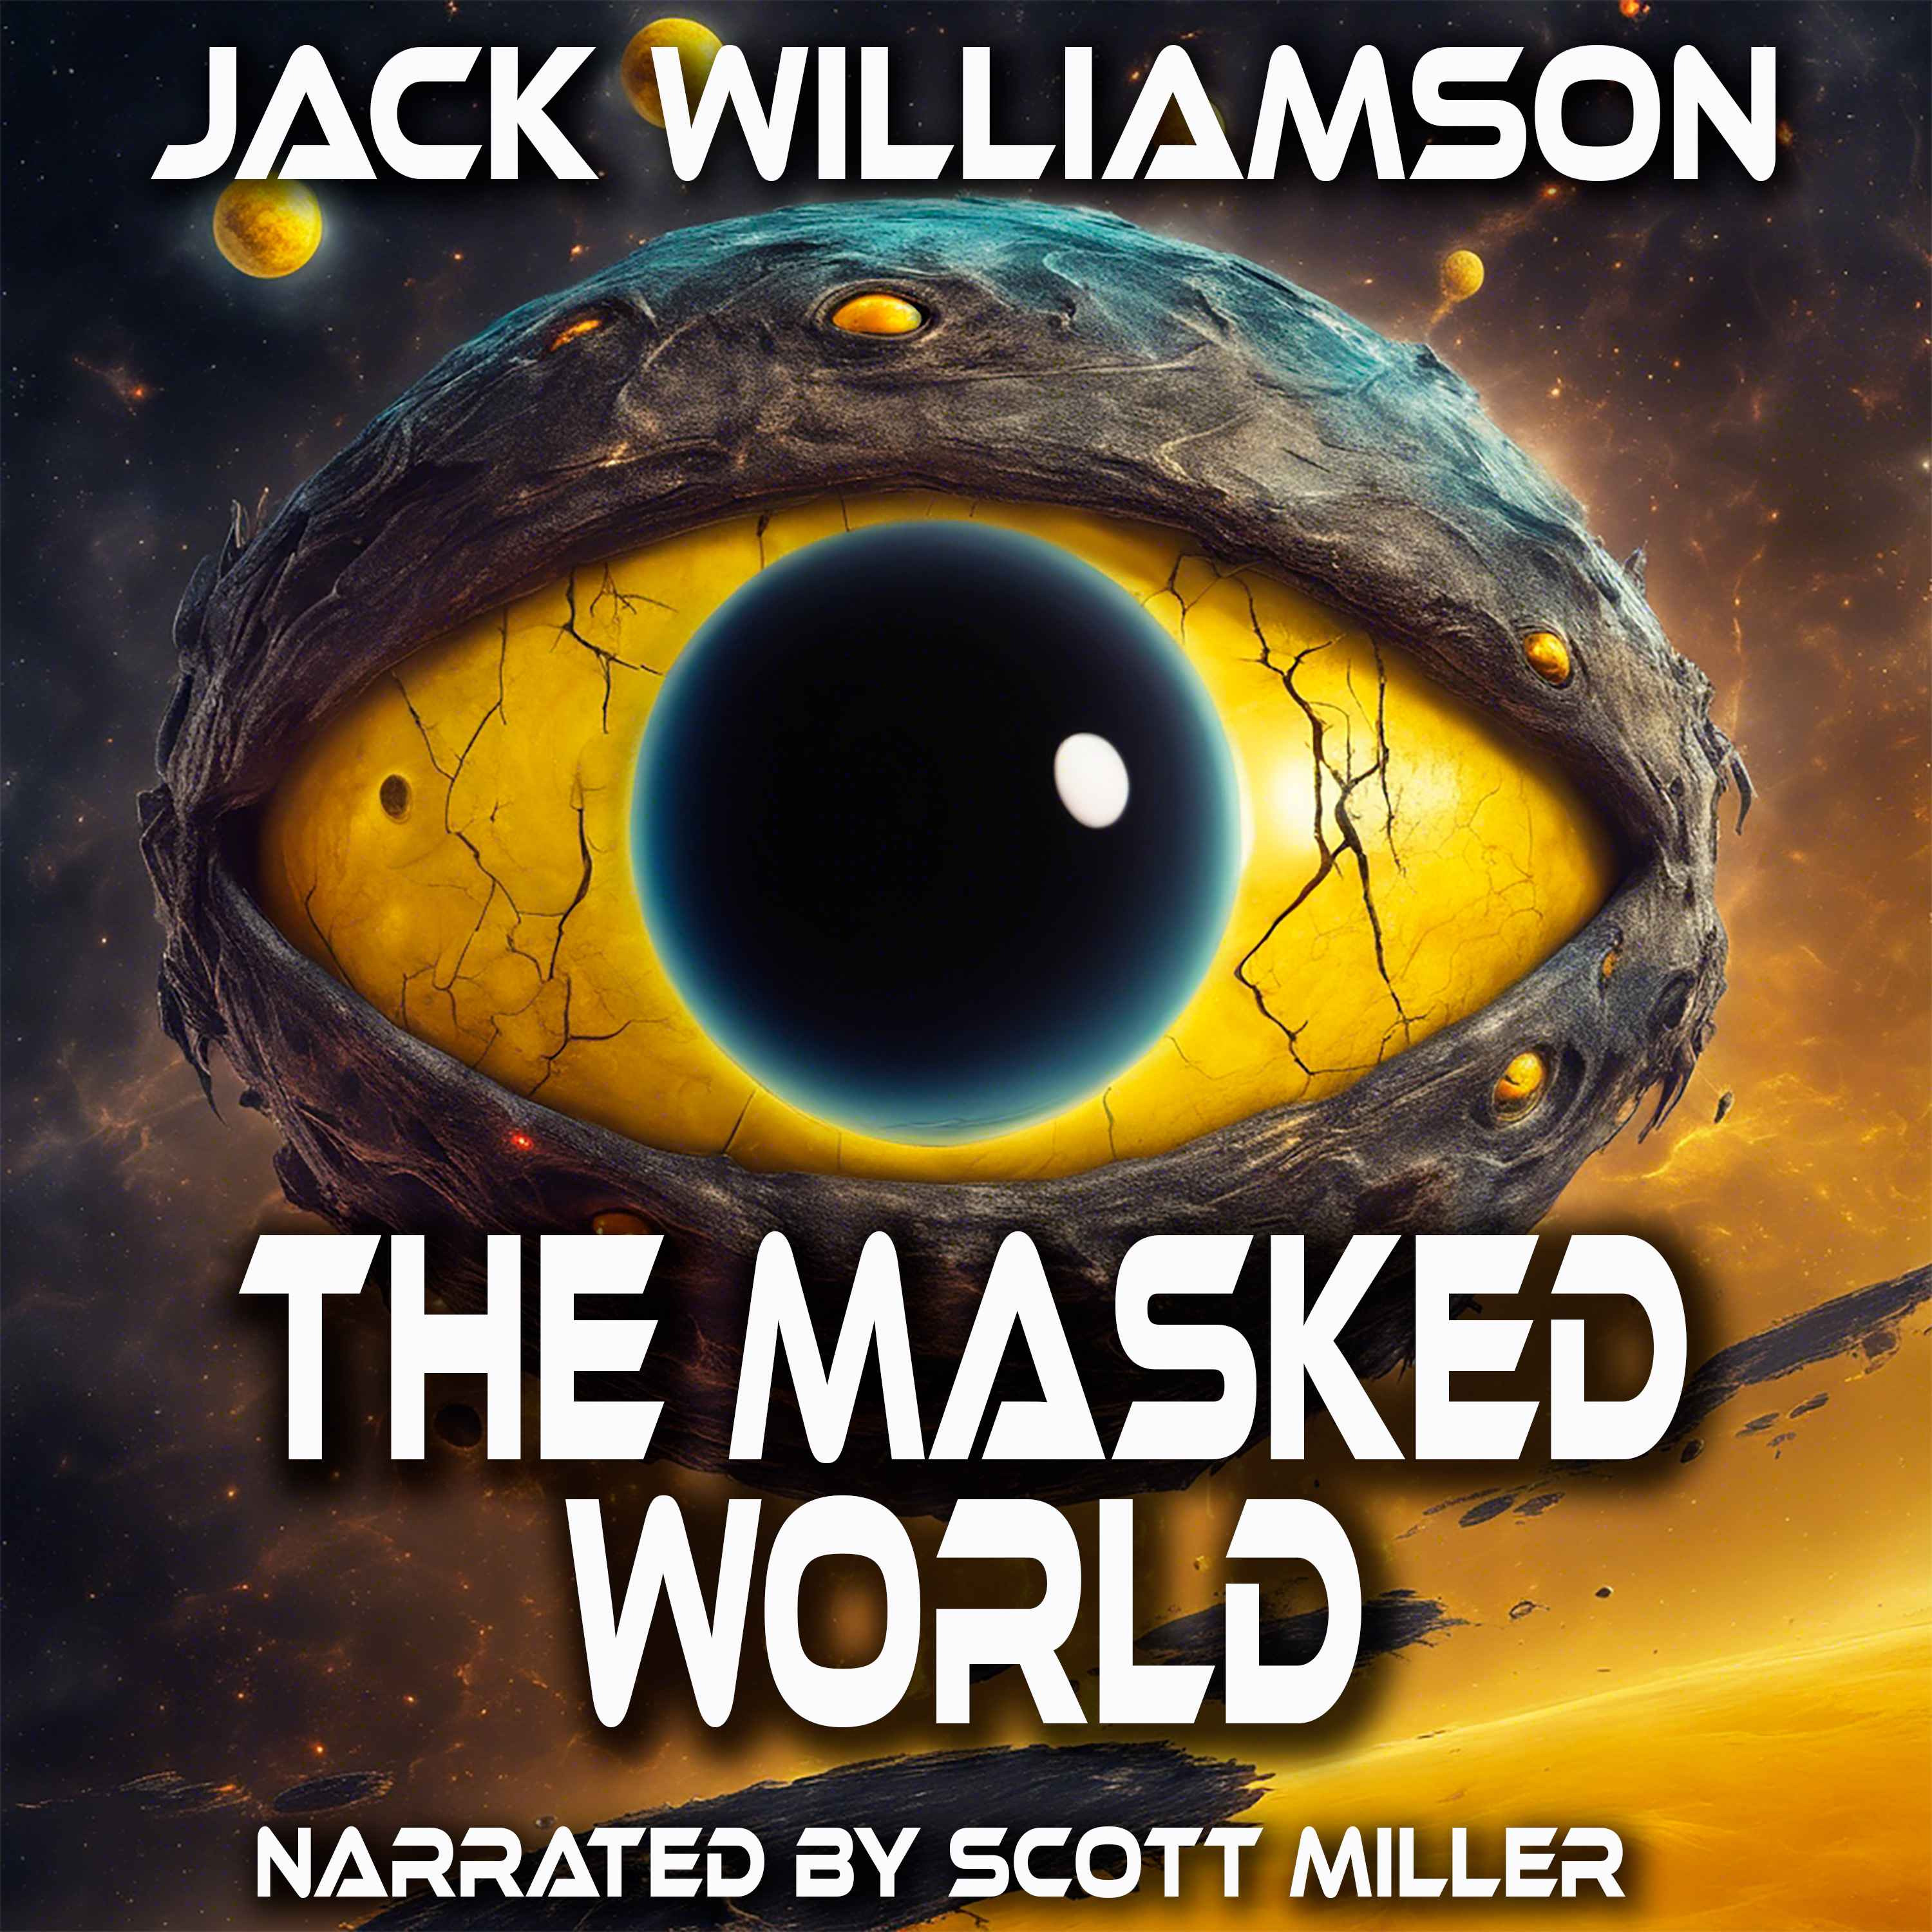 The Masked World by Jack Williamson - Short Sci-Fi Story From the 1960s